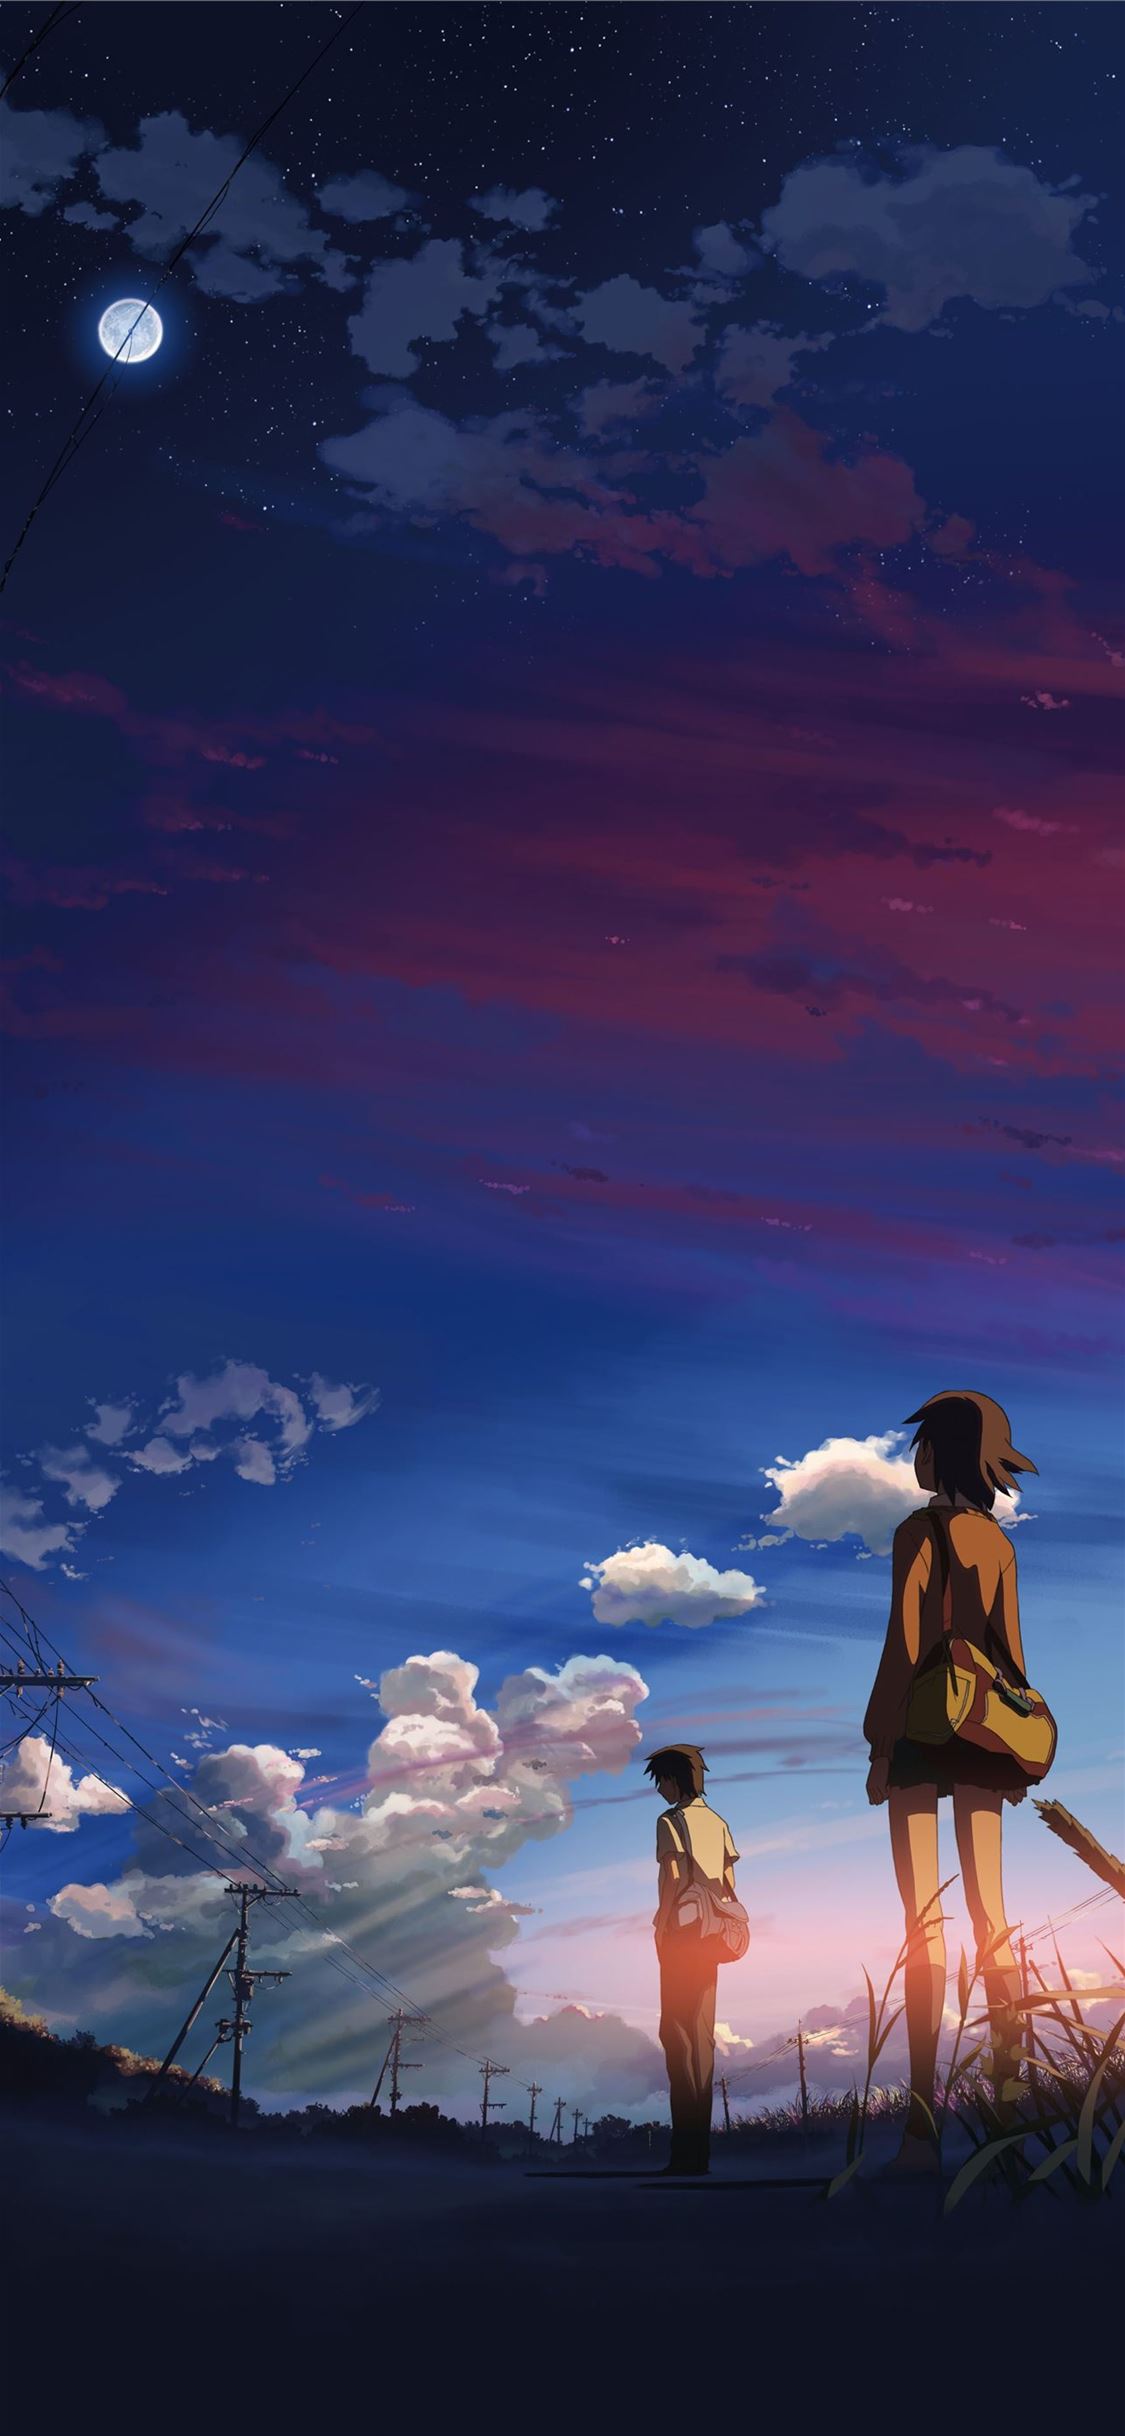 Howls Moving Castle 2 wallpaper  Anime wallpapers  40994